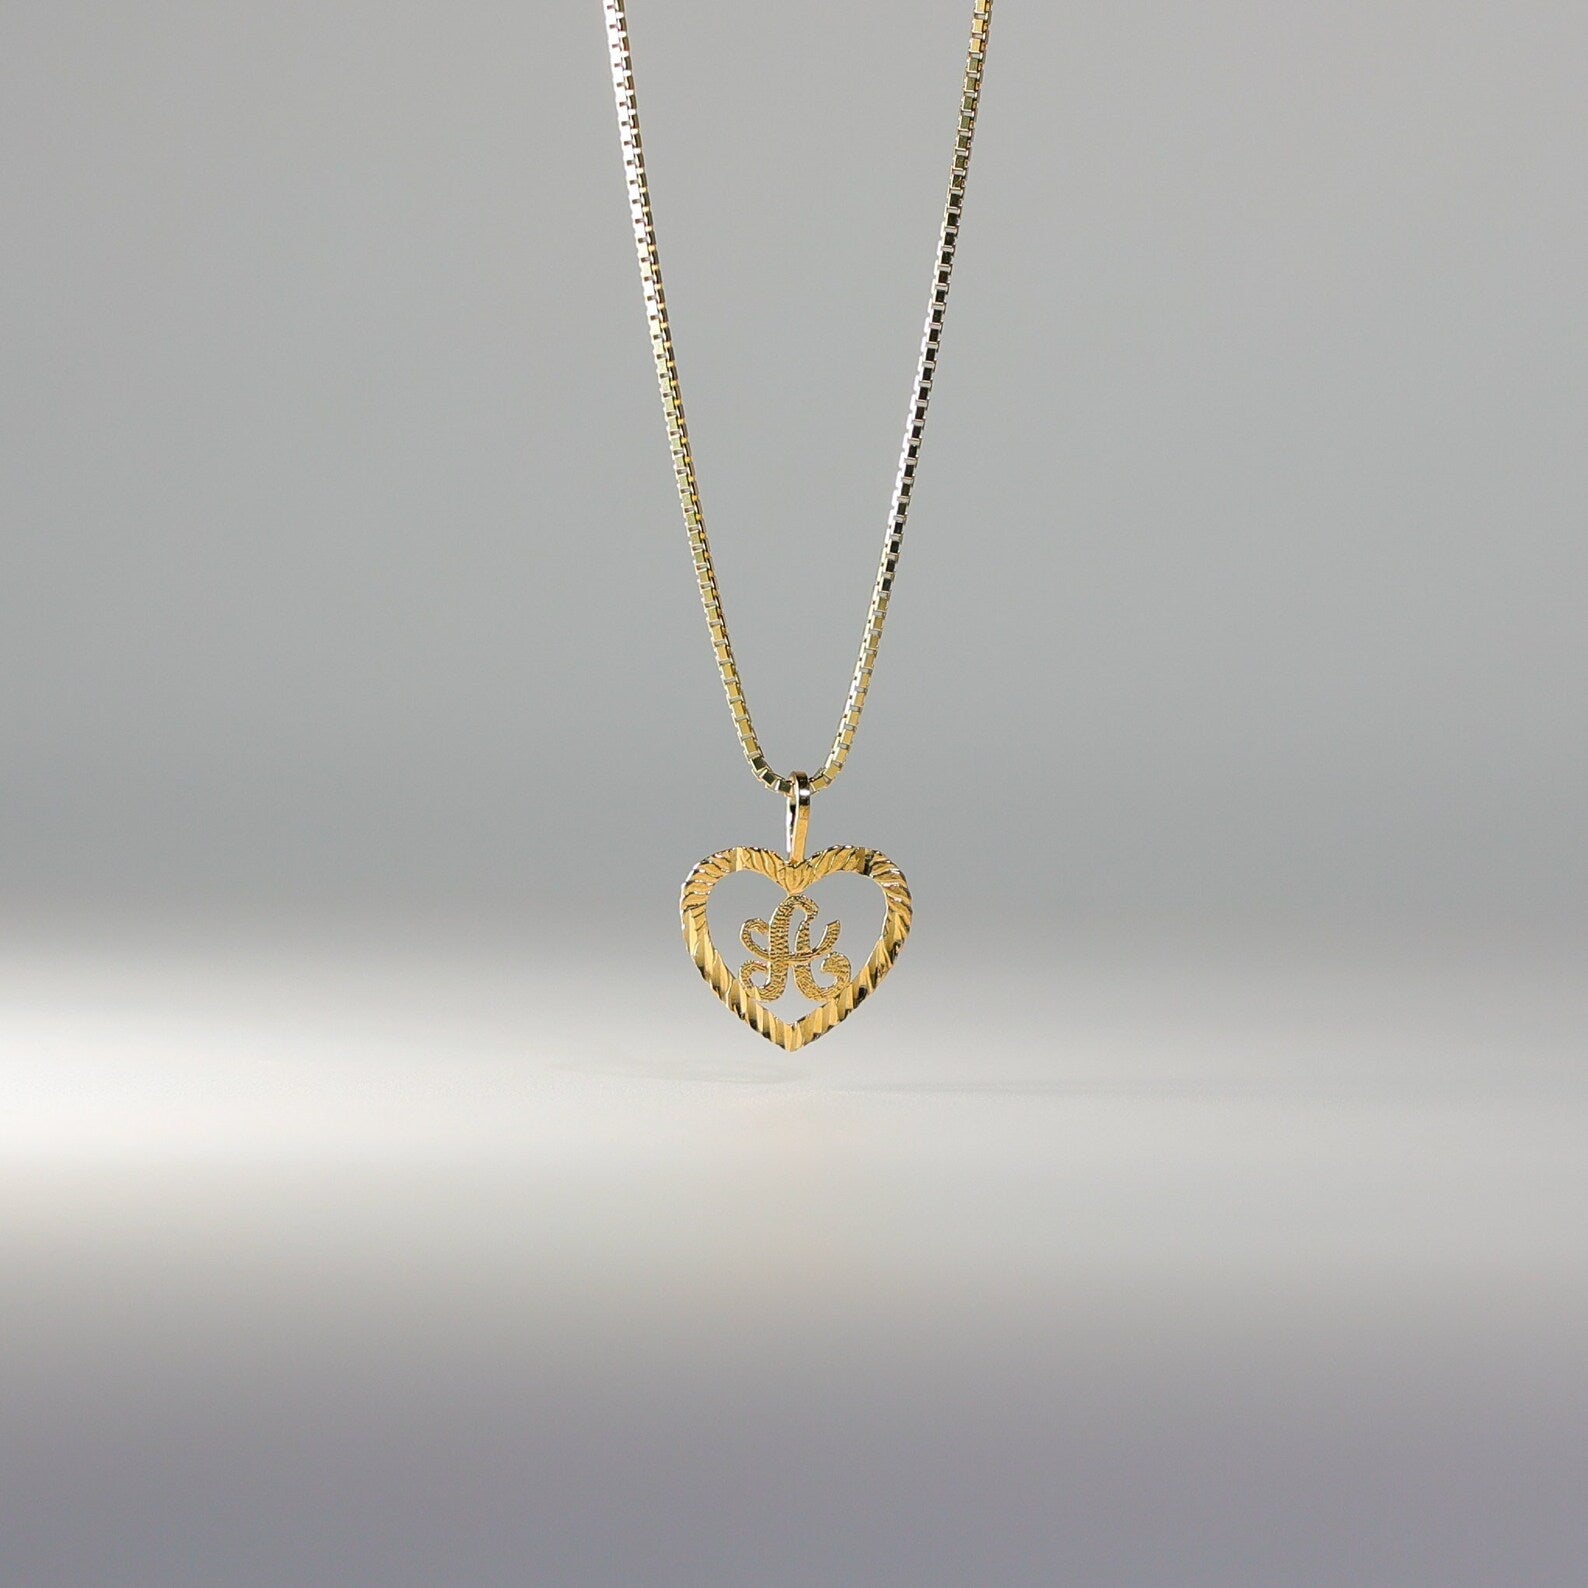 Gold Heart-Shaped Letter A Pendant | A-Z Pendants - Charlie & Co. Jewelry